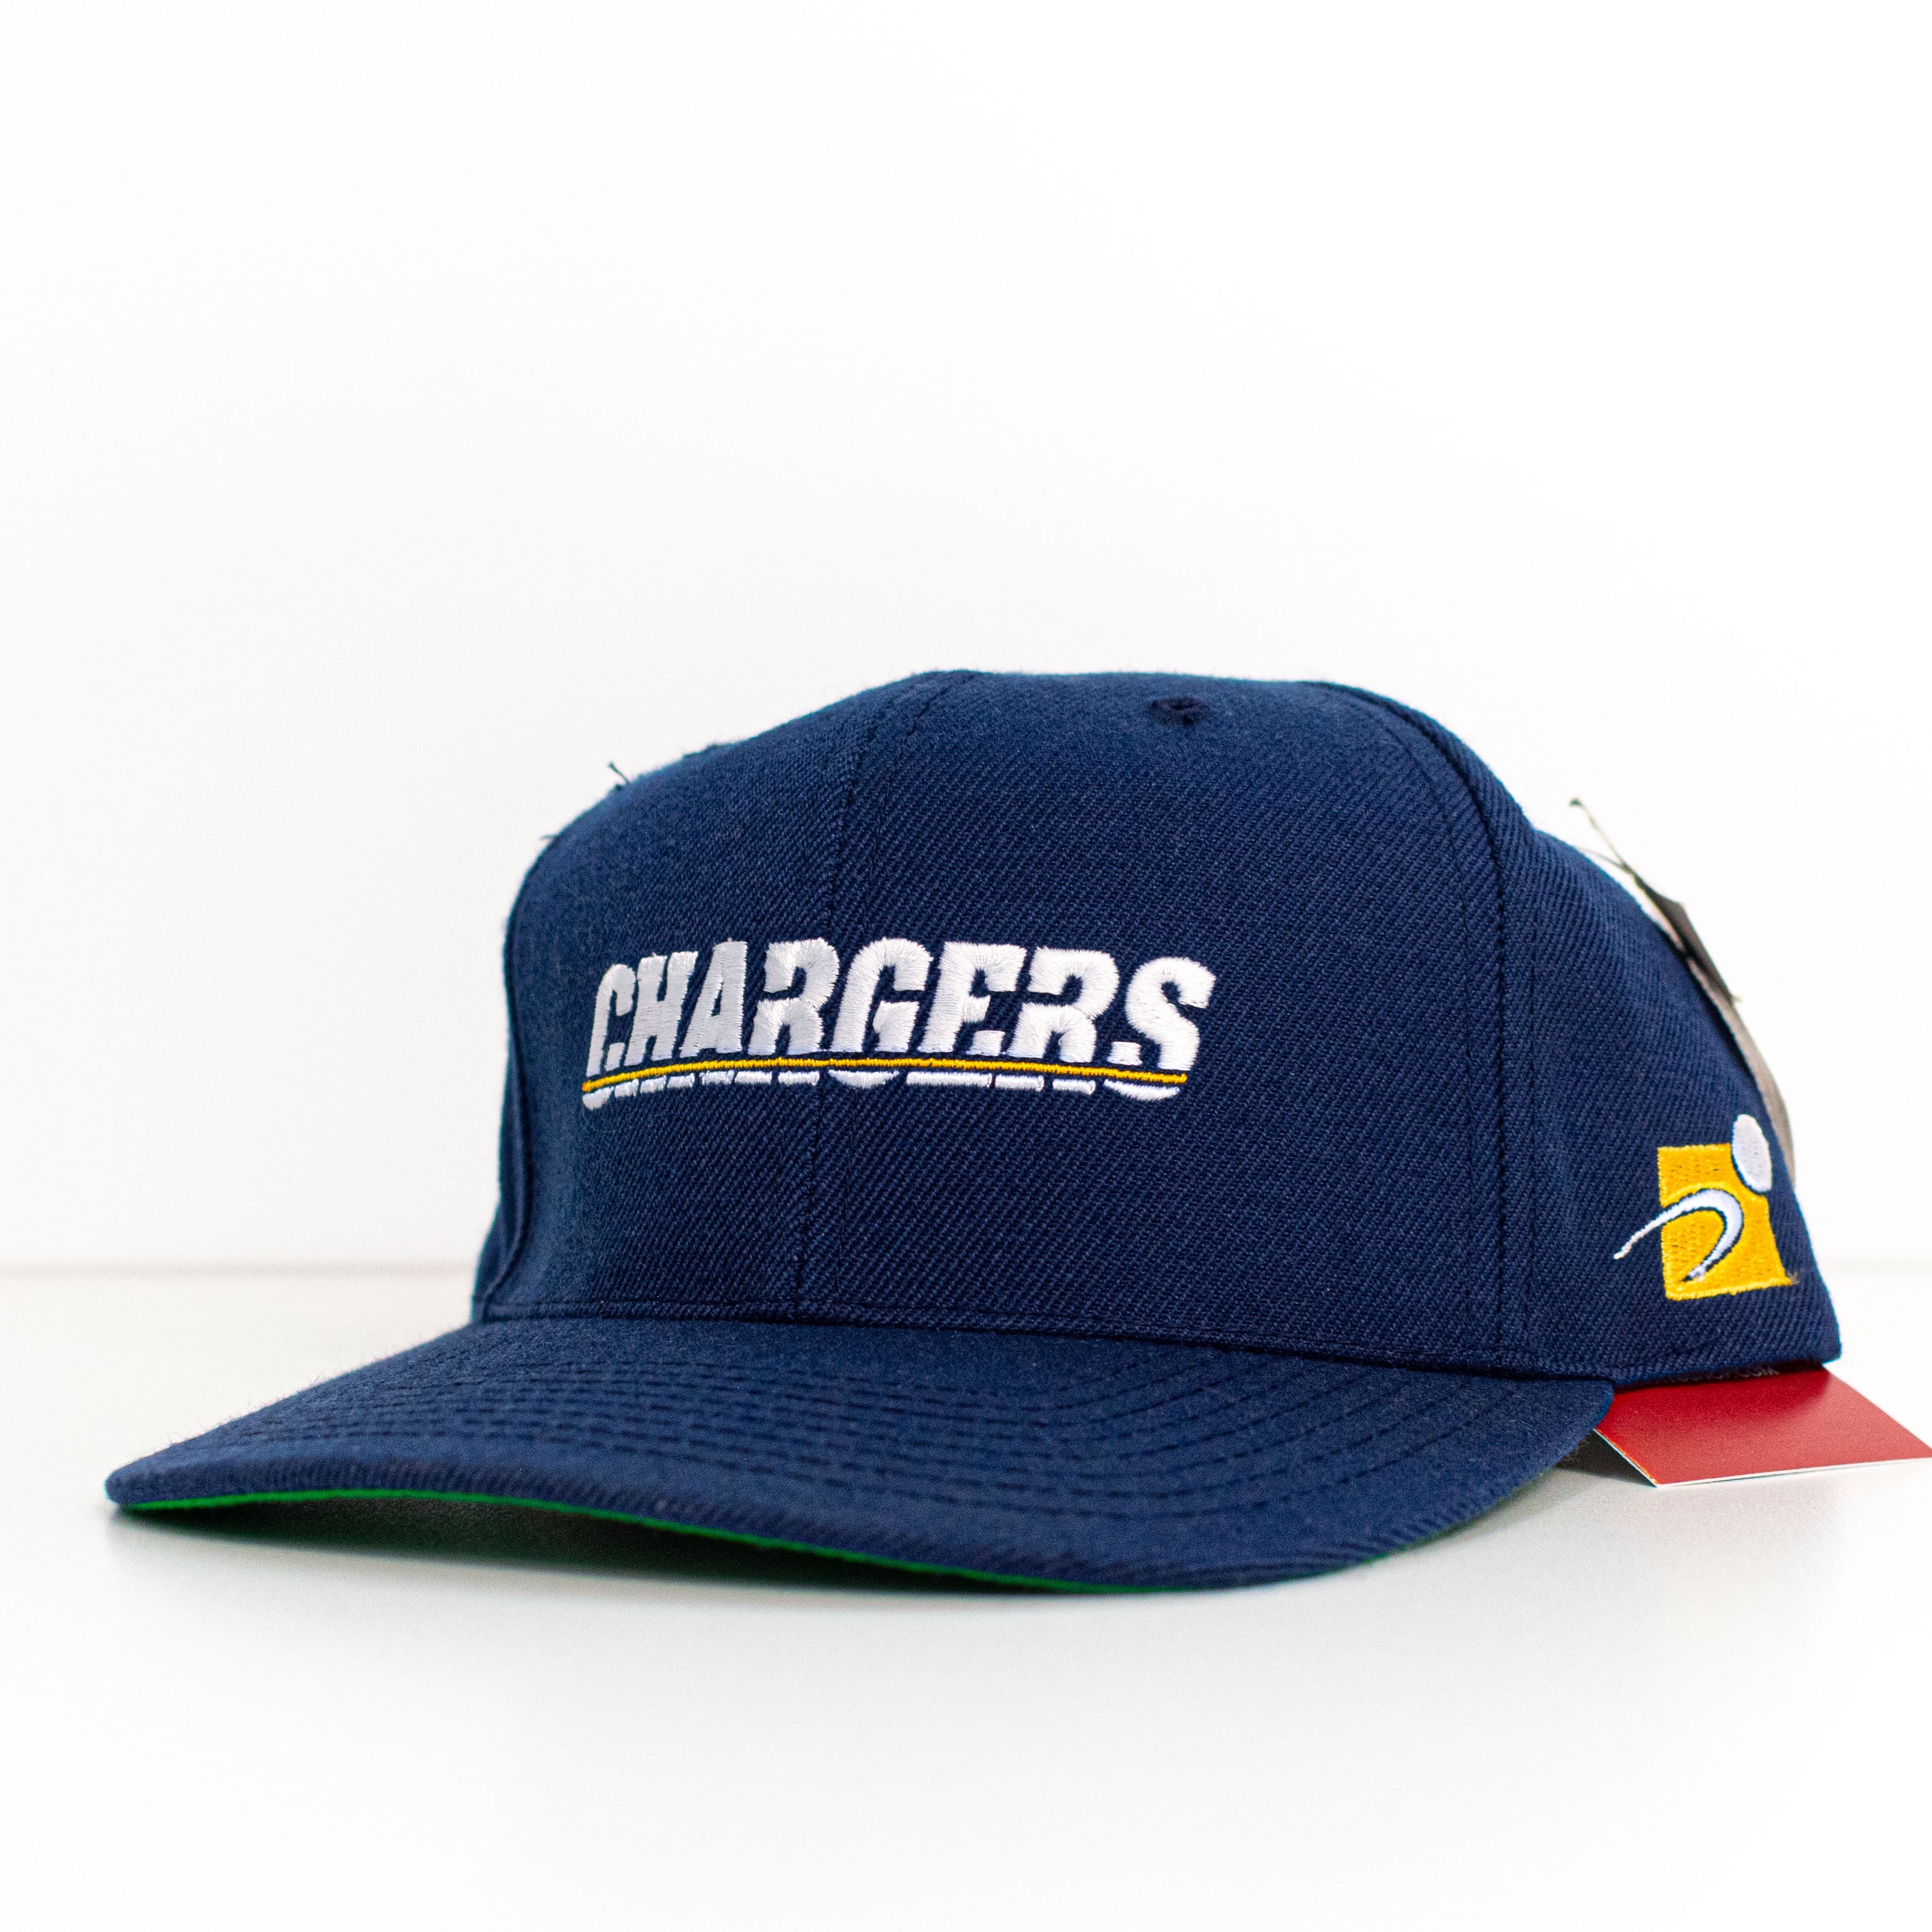 Sports Specialties NFL San Diego Chargers Team Blend SnapBack Hat